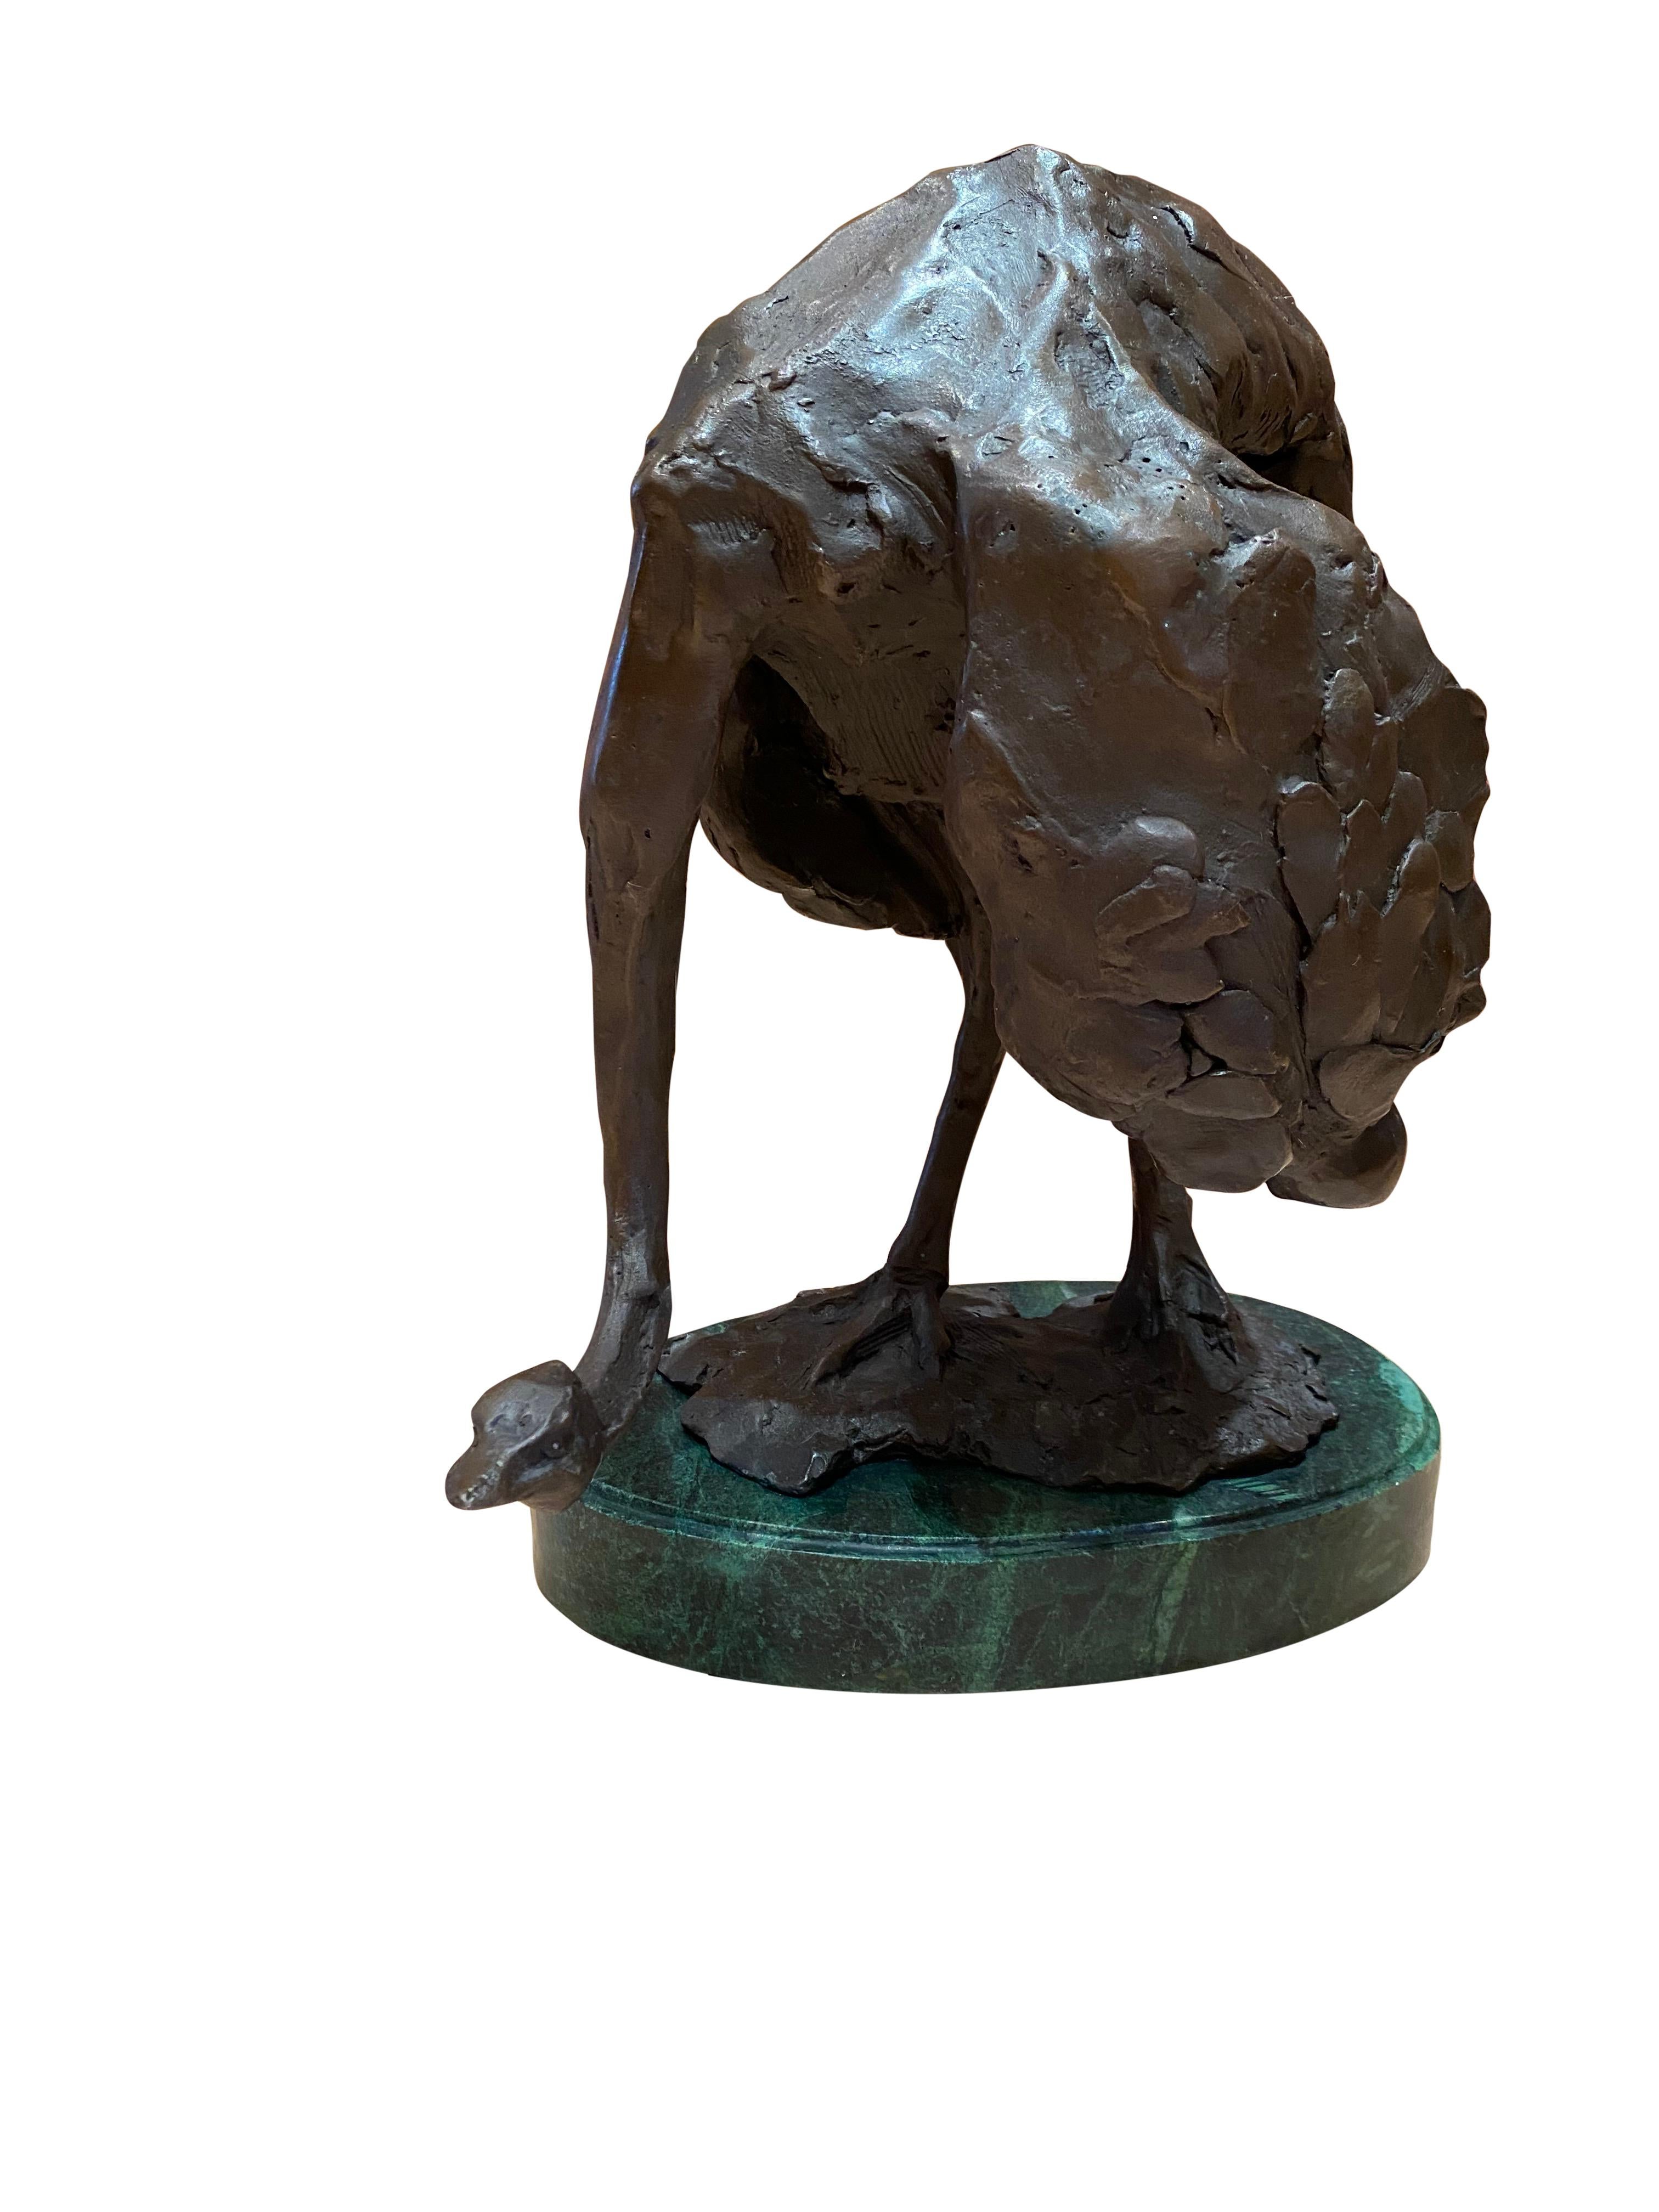 A fine quality bronze ostrich sculpture, 20th century. Stands on a verdigri proportionate oval marble base. This piece is offered with excellent detail and sharp points of view. The artist has paid great attention to detail.